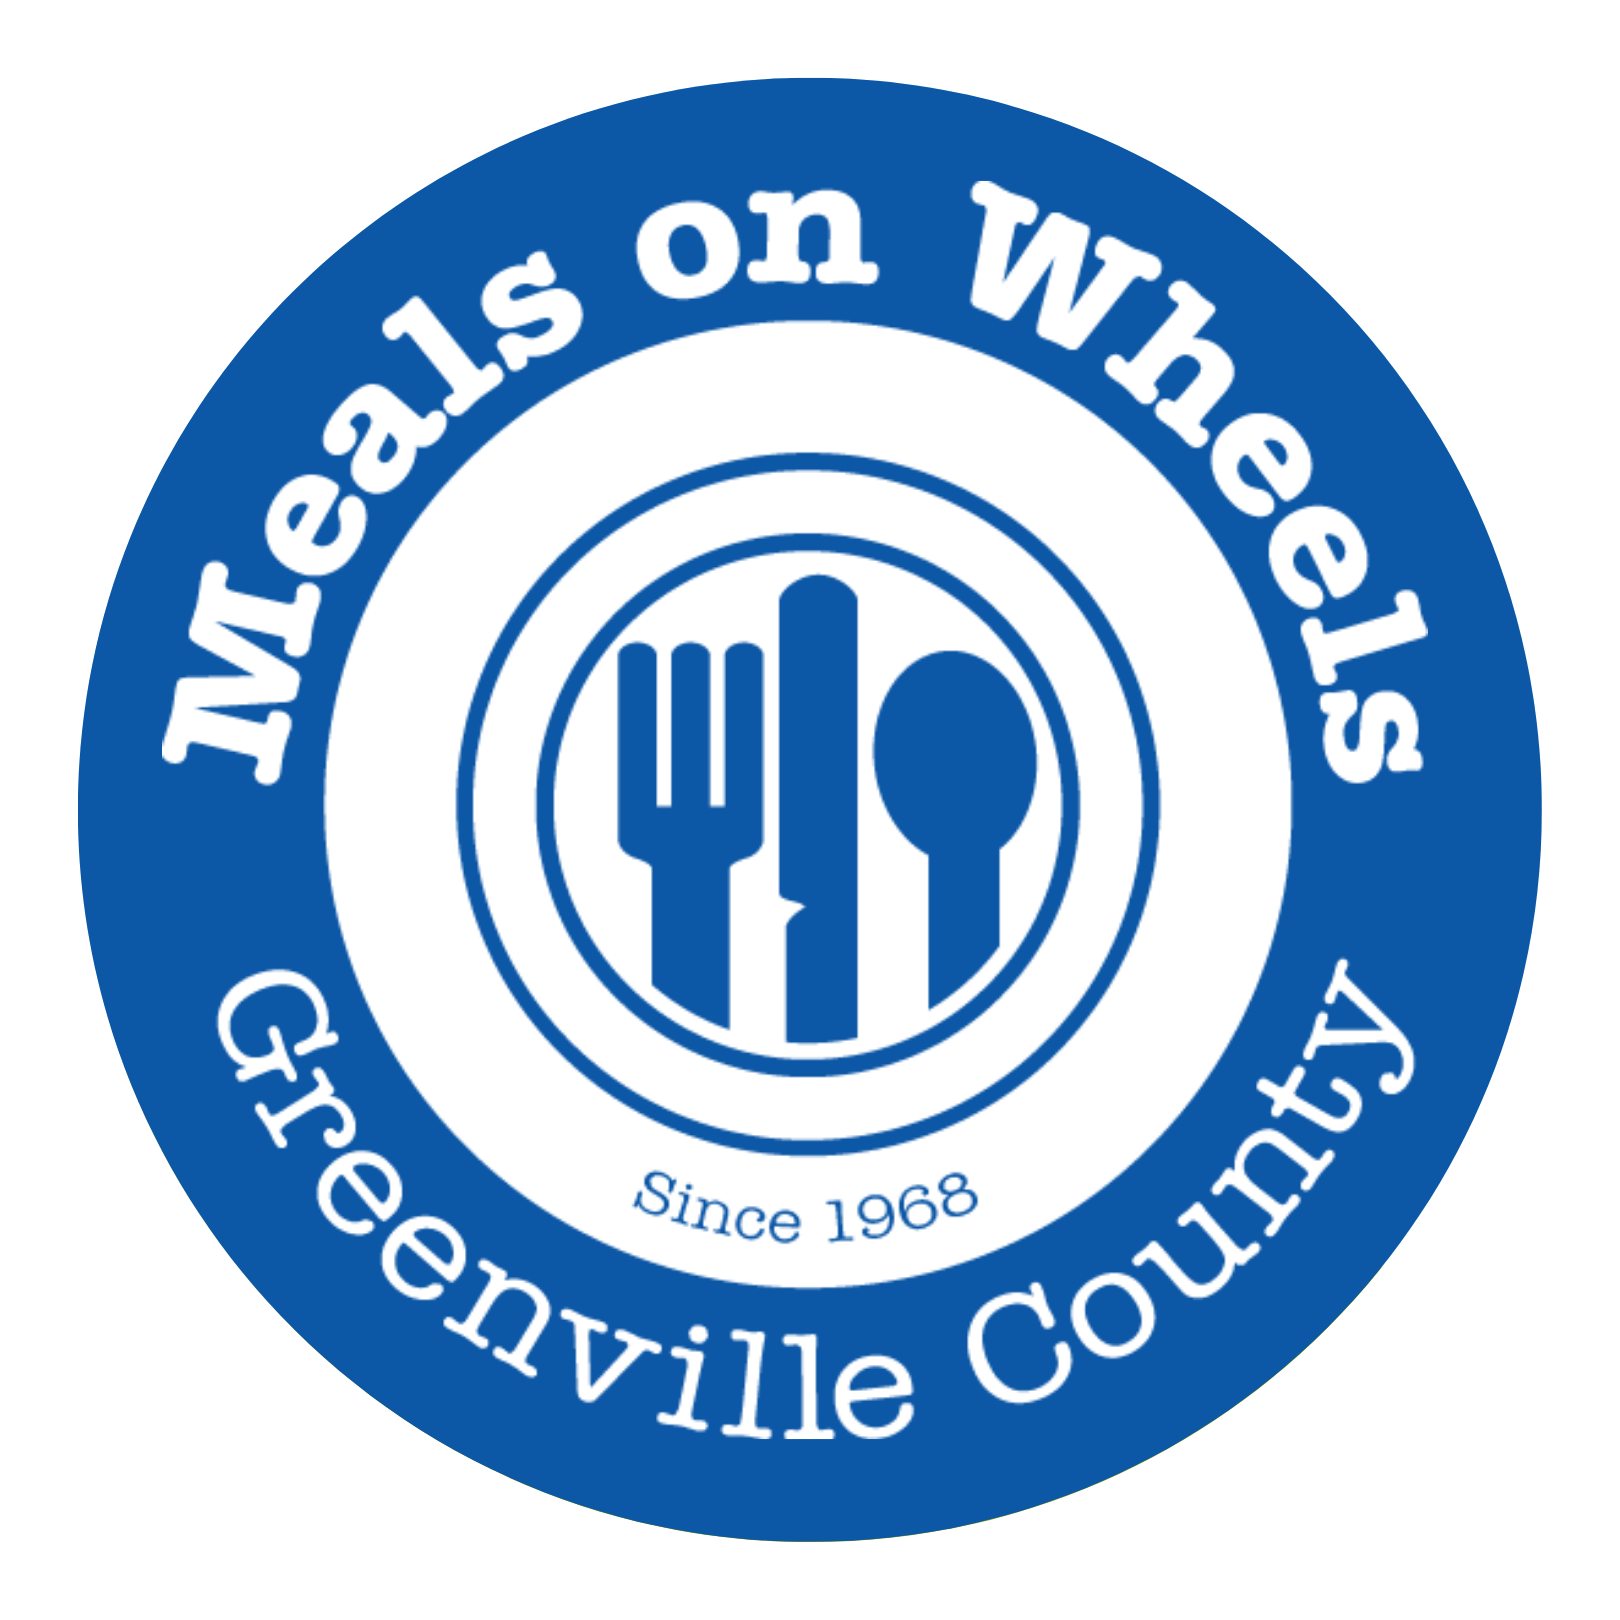 Meals on Wheels Greenville County